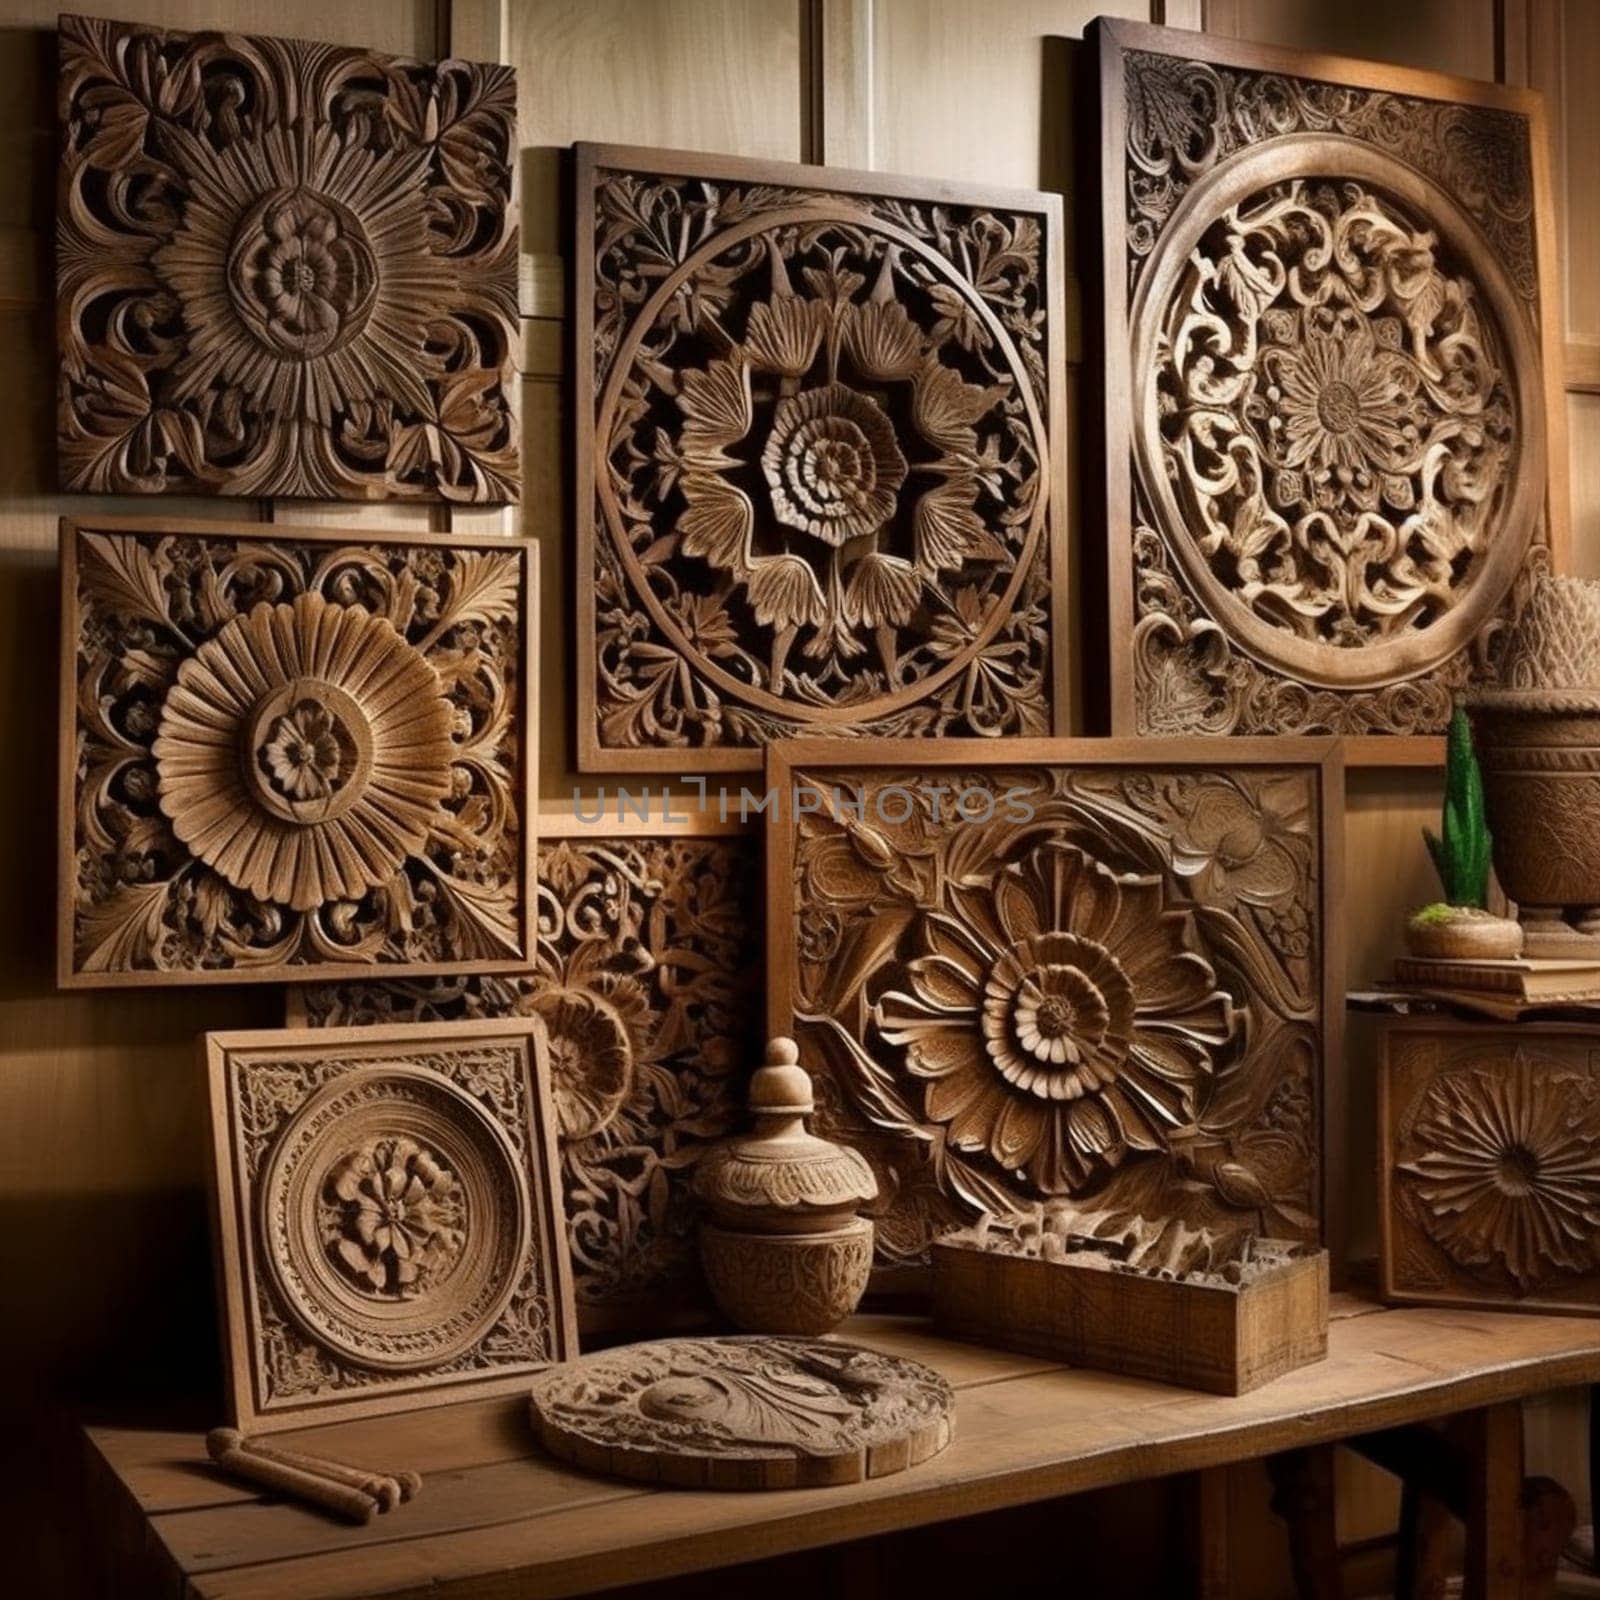 Intricate Wooden Sculptures Showcase Image by Sahin